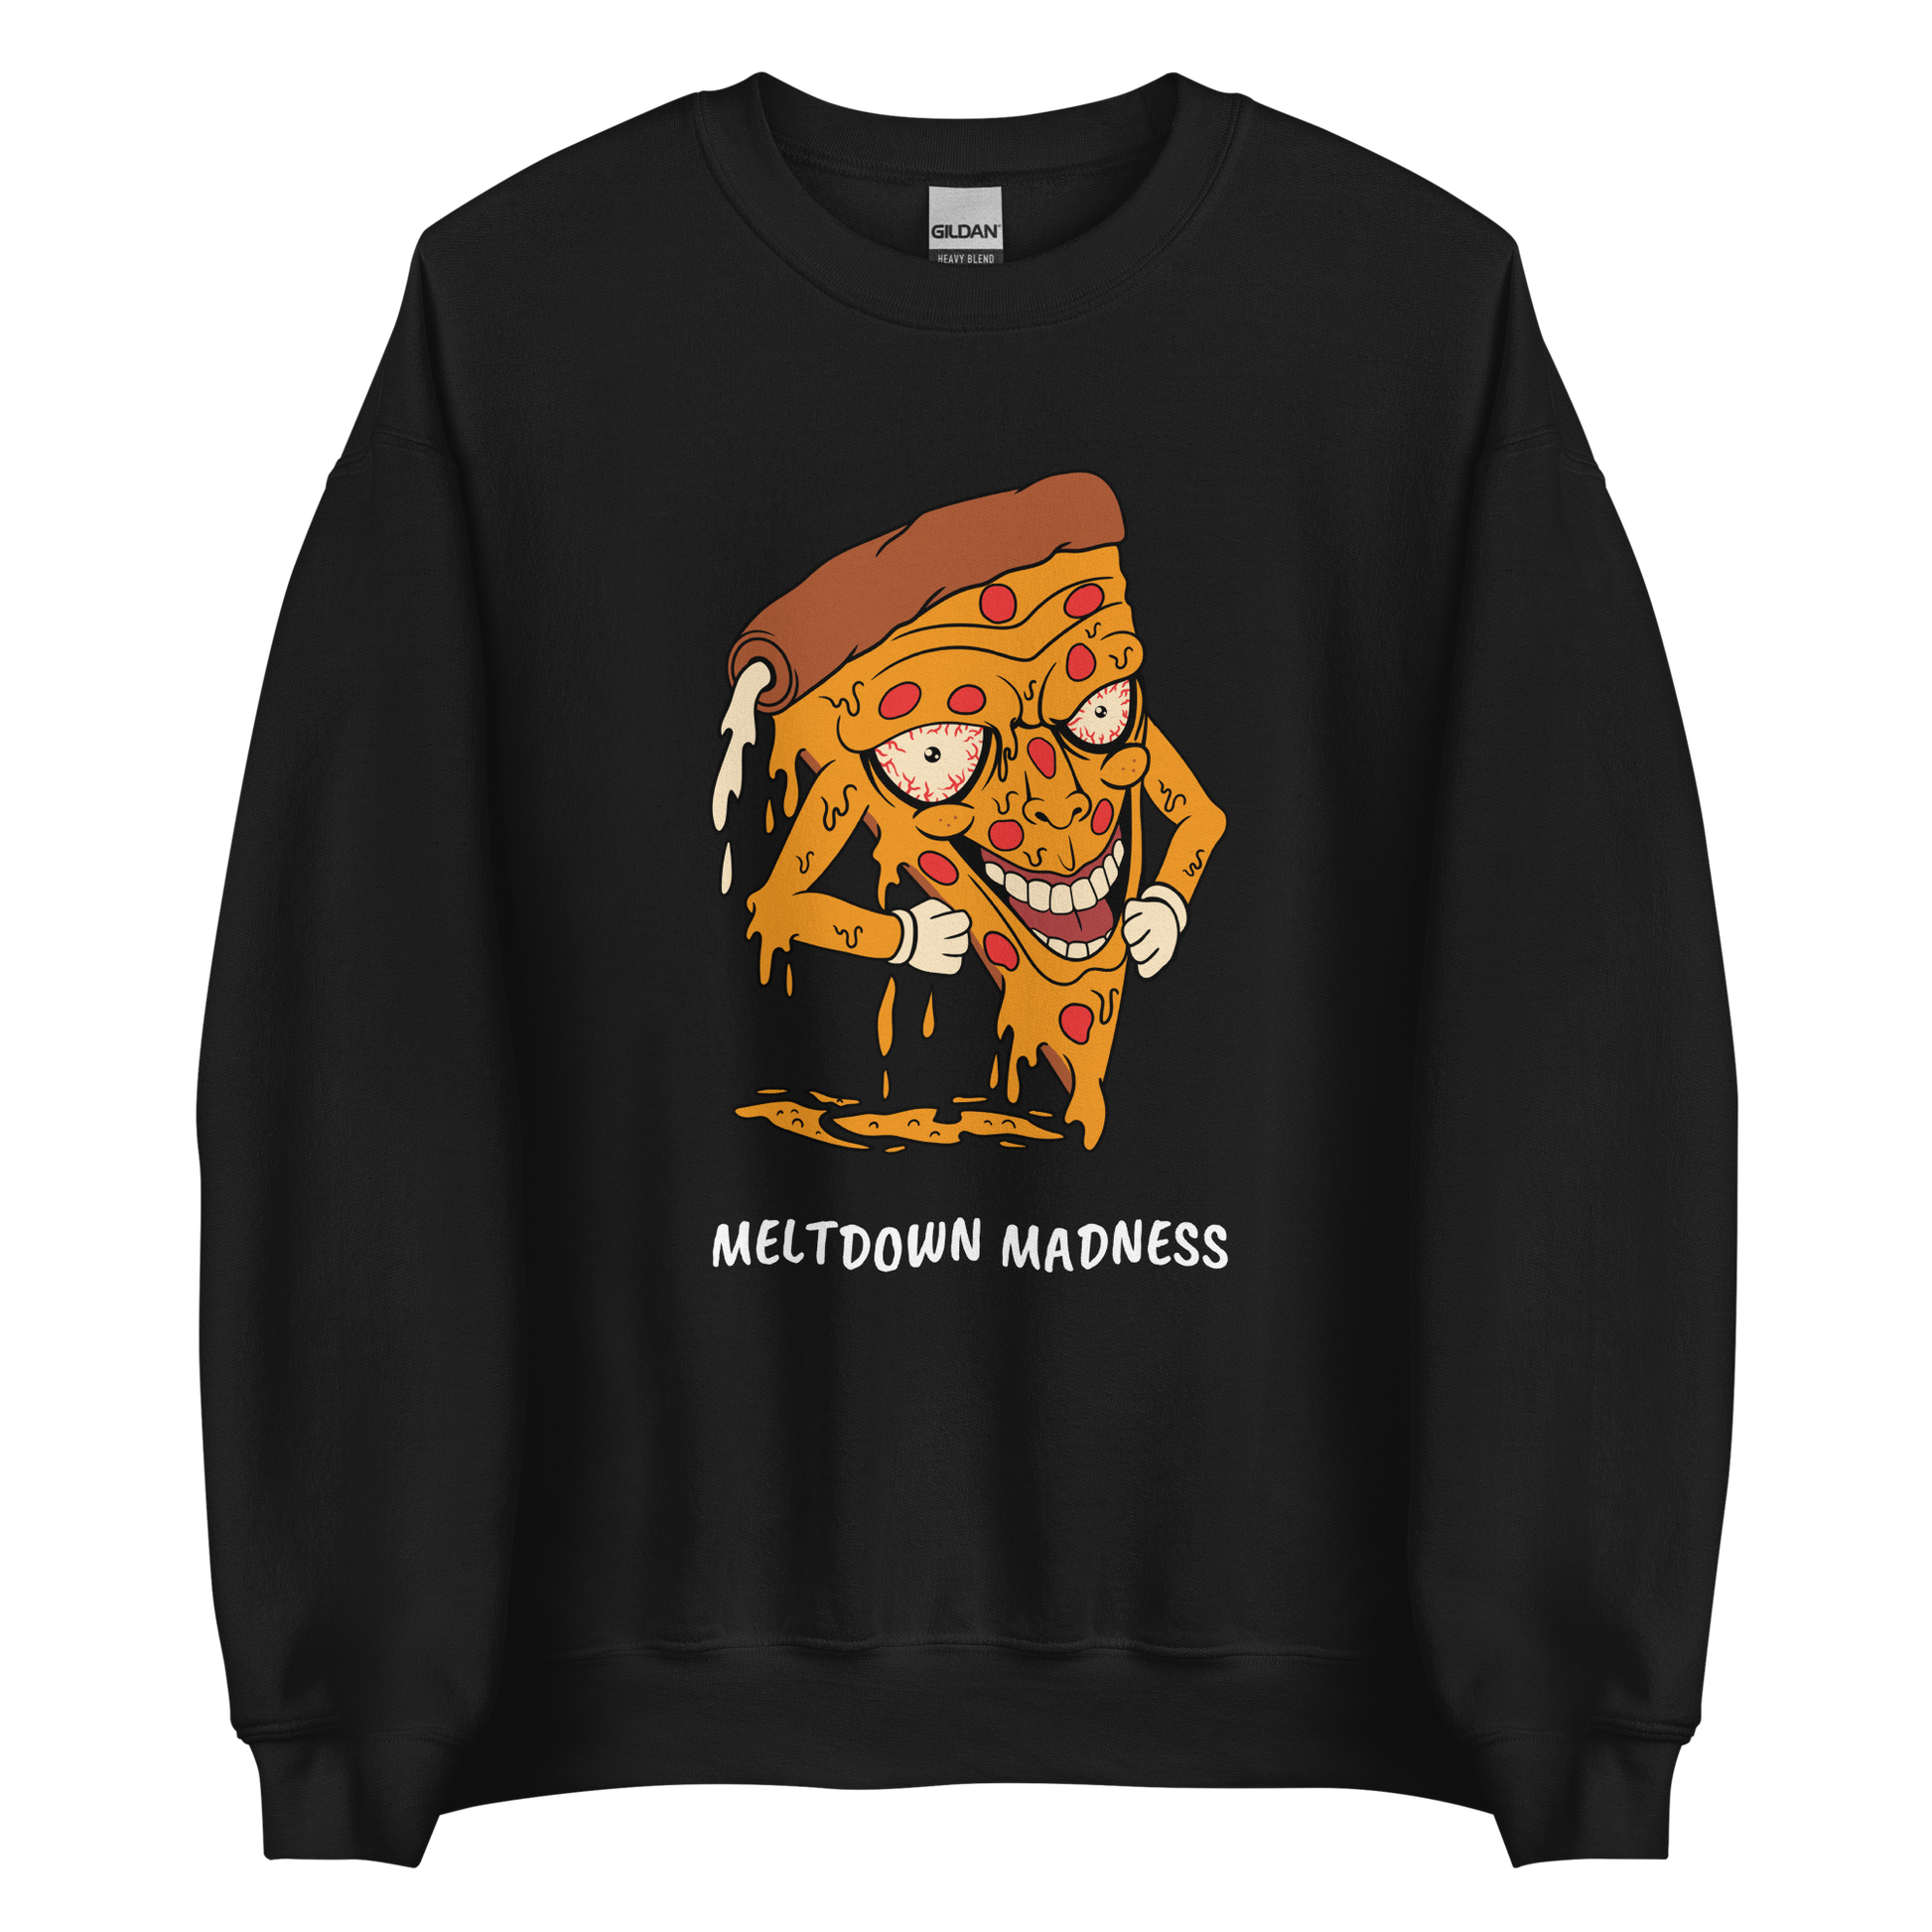 Black Melting Pizza Sweatshirt featuring a Meltdown Madness graphic on the chest - Funny Graphic Pizza Sweatshirts - Boozy Fox